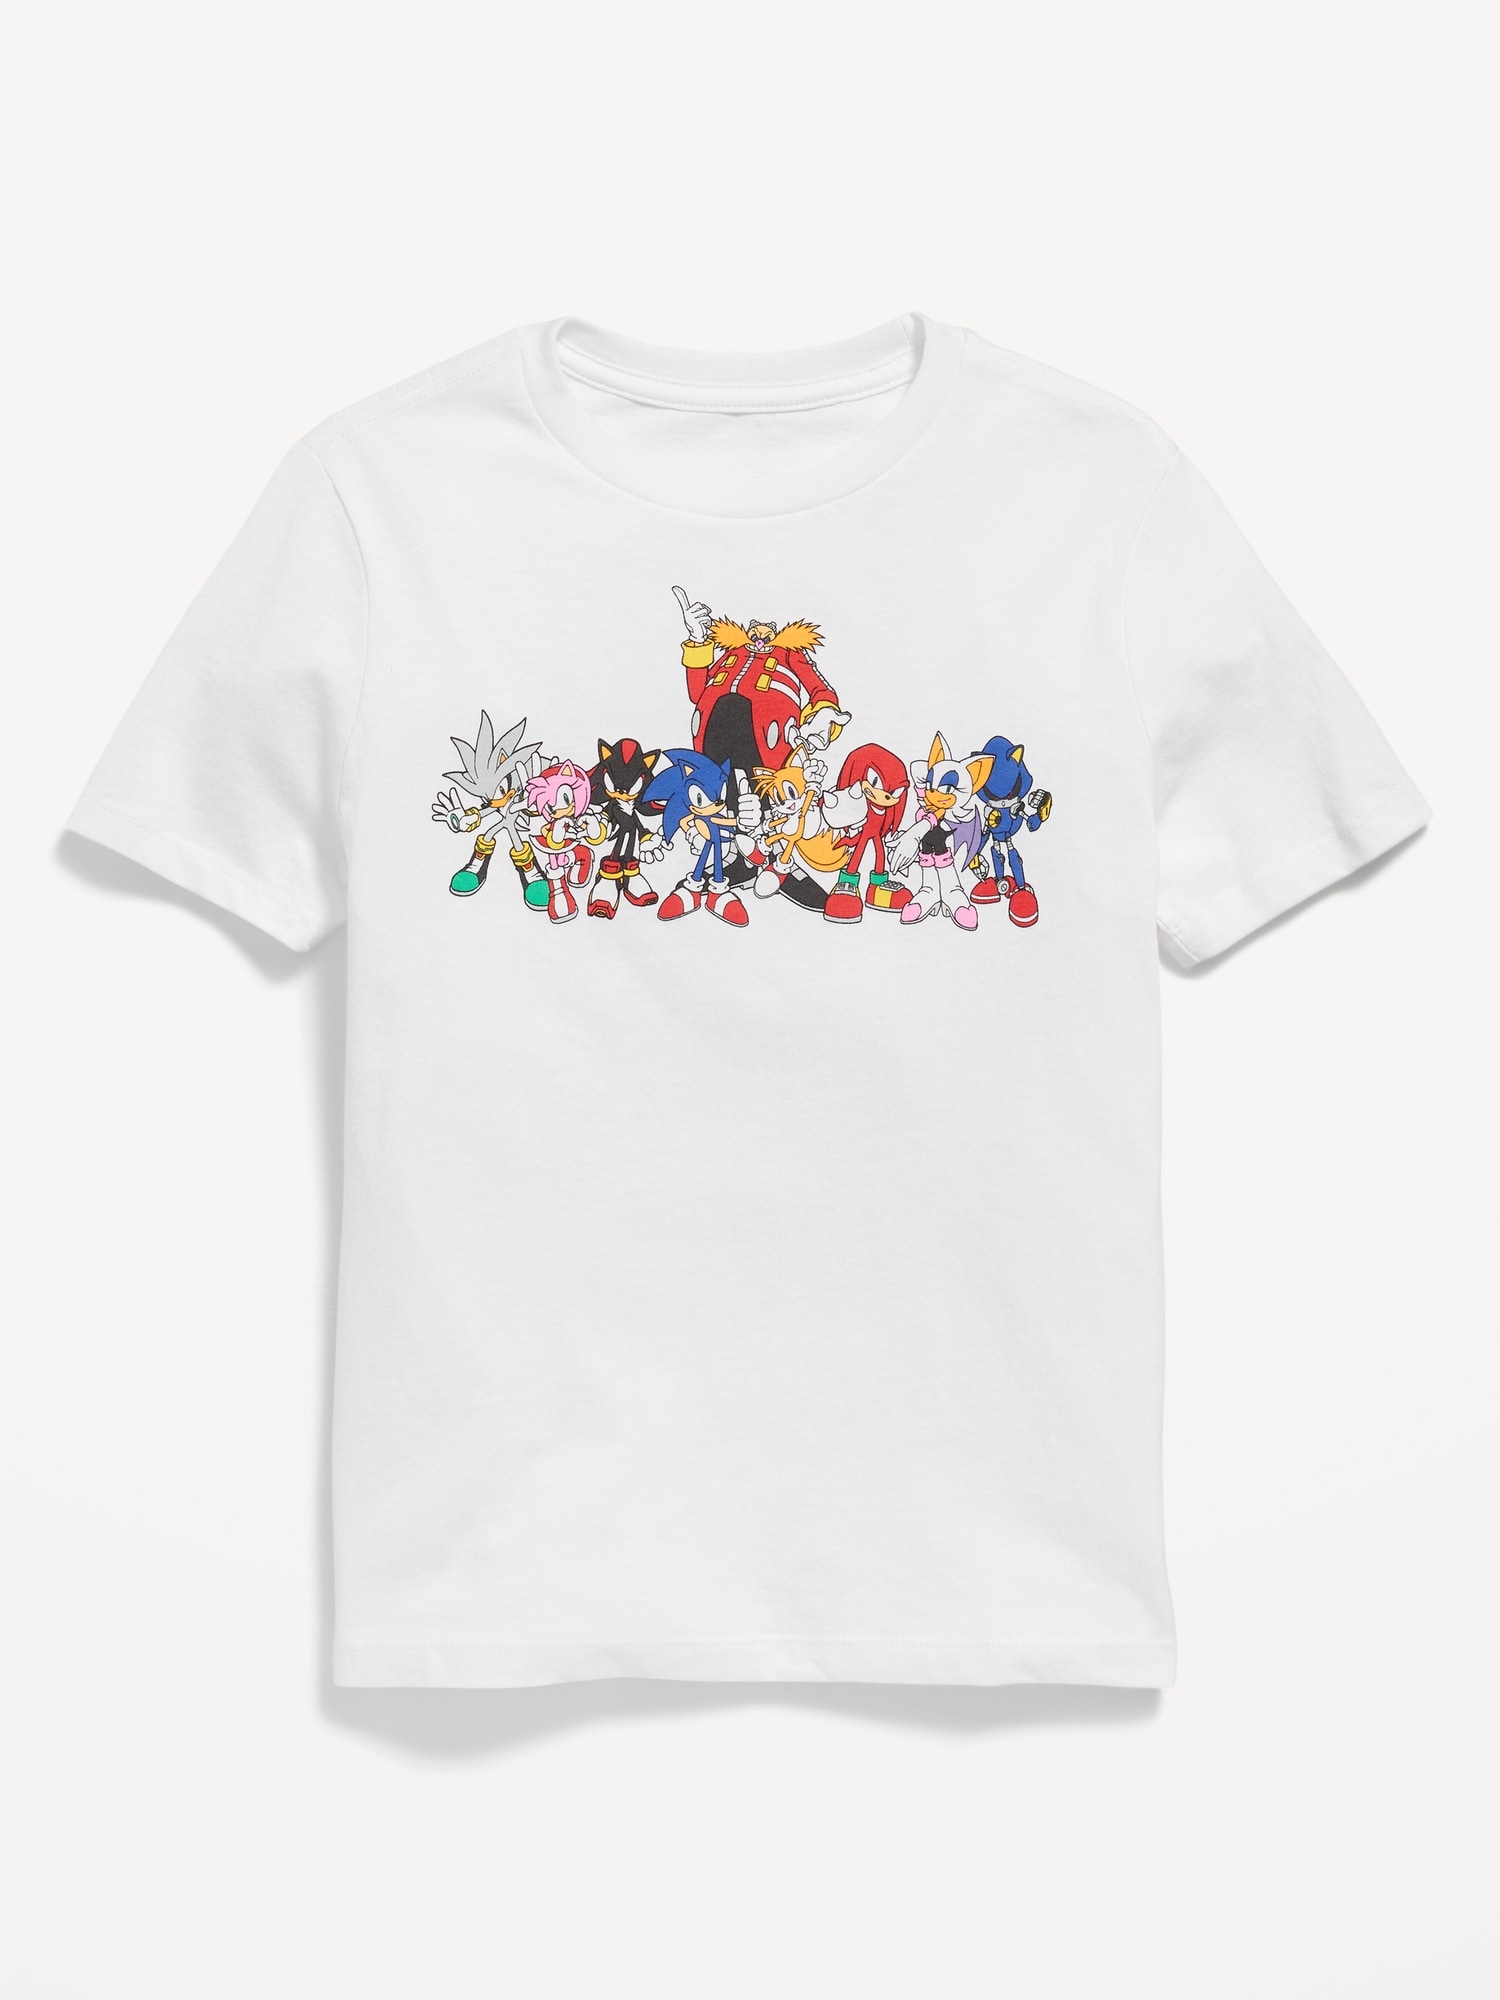 Sonic The Hedgehog Gender-Neutral Graphic T-Shirt for Kids